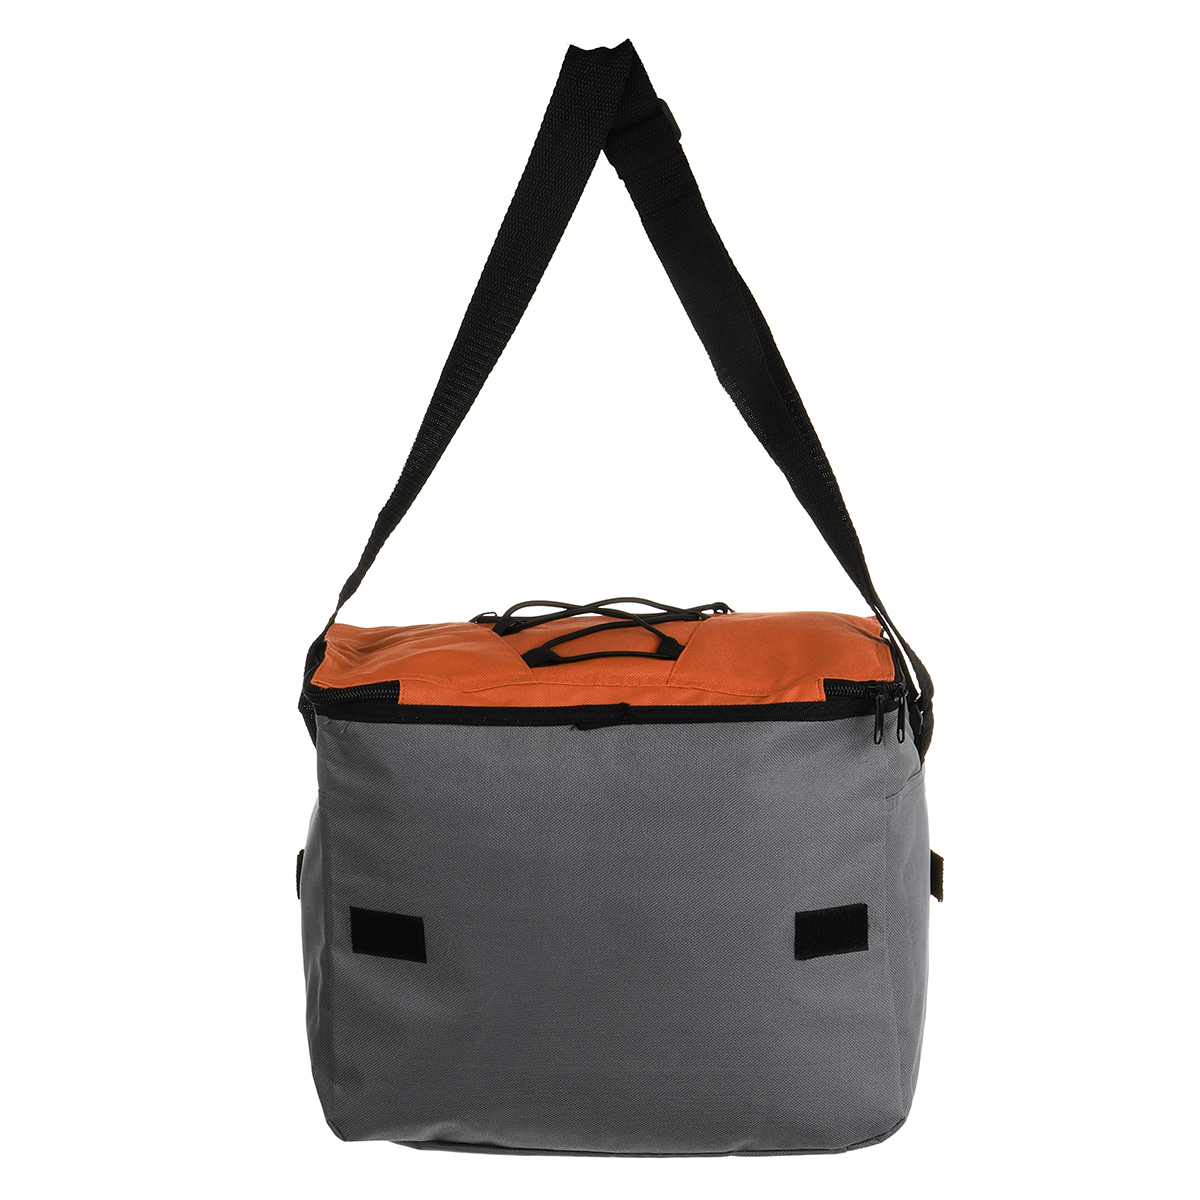 3L-Insulated-Lunch-Bag-Food-Container-Box-Bag-Food-Delivery-Bag-Waterproof-Lightweight-Grocery-Stora-1731824-7